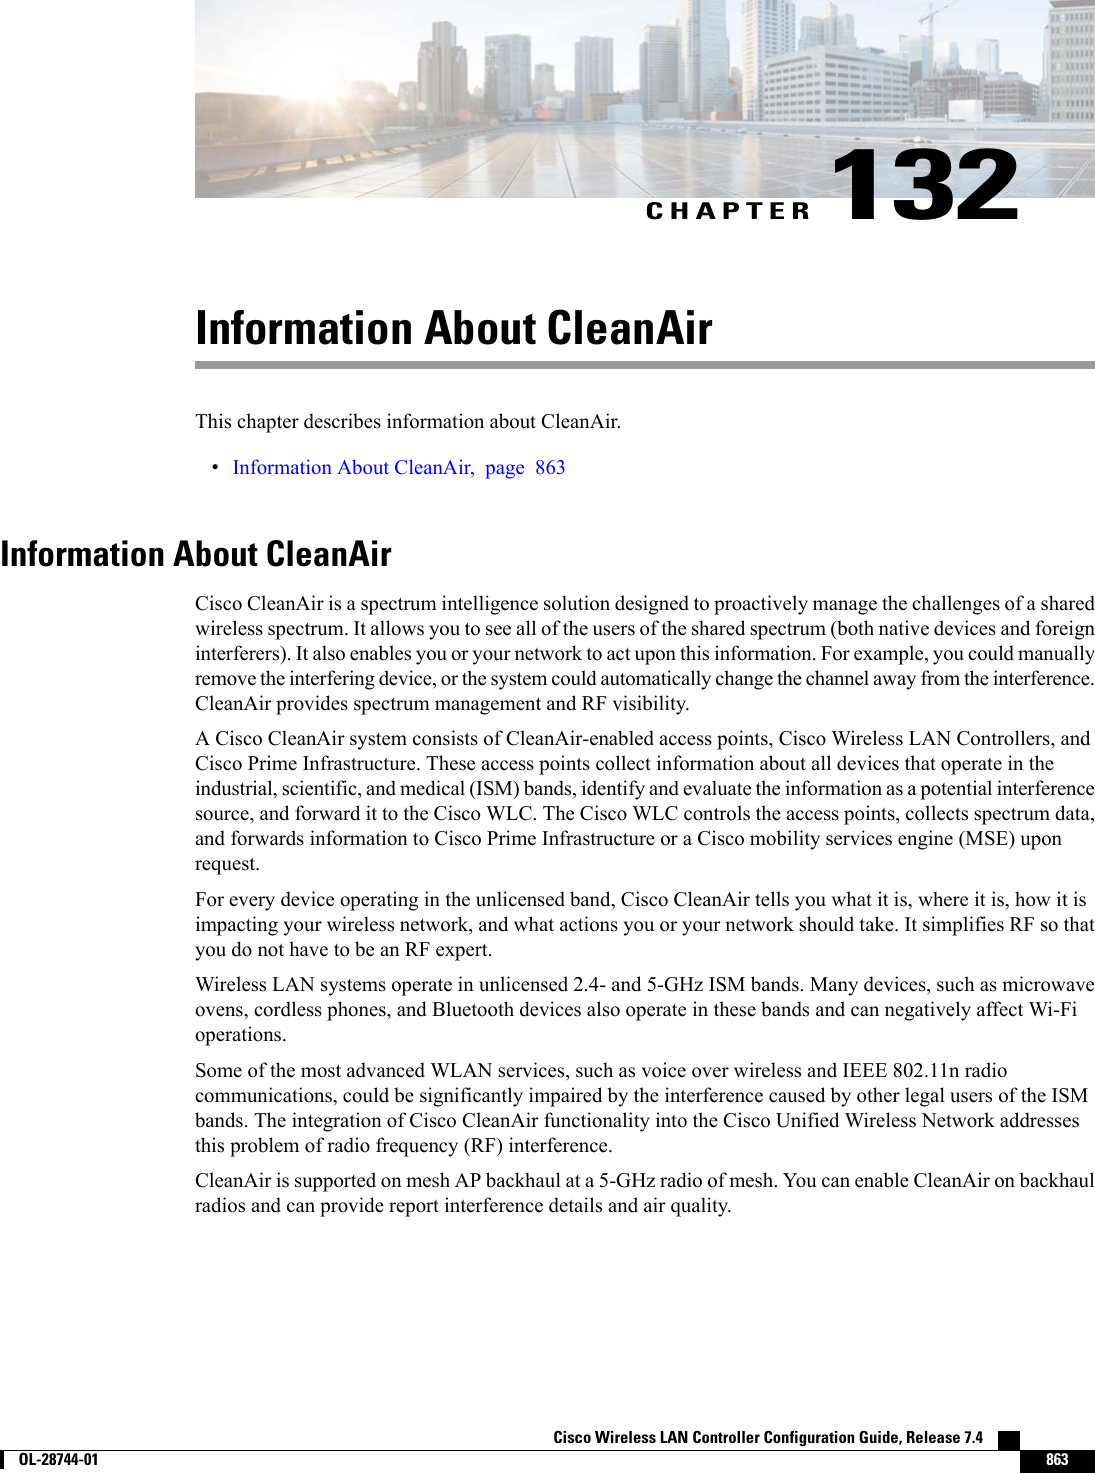 CHAPTER 132Information About CleanAirThis chapter describes information about CleanAir.•Information About CleanAir, page 863Information About CleanAirCisco CleanAir is a spectrum intelligence solution designed to proactively manage the challenges of a sharedwireless spectrum. It allows you to see all of the users of the shared spectrum (both native devices and foreigninterferers). It also enables you or your network to act upon this information. For example, you could manuallyremove the interfering device, or the system could automatically change the channel away from the interference.CleanAir provides spectrum management and RF visibility.A Cisco CleanAir system consists of CleanAir-enabled access points, Cisco Wireless LAN Controllers, andCisco Prime Infrastructure. These access points collect information about all devices that operate in theindustrial, scientific, and medical (ISM) bands, identify and evaluate the information as a potential interferencesource, and forward it to the Cisco WLC. The Cisco WLC controls the access points, collects spectrum data,and forwards information to Cisco Prime Infrastructure or a Cisco mobility services engine (MSE) uponrequest.For every device operating in the unlicensed band, Cisco CleanAir tells you what it is, where it is, how it isimpacting your wireless network, and what actions you or your network should take. It simplifies RF so thatyou do not have to be an RF expert.Wireless LAN systems operate in unlicensed 2.4- and 5-GHz ISM bands. Many devices, such as microwaveovens, cordless phones, and Bluetooth devices also operate in these bands and can negatively affect Wi-Fioperations.Some of the most advanced WLAN services, such as voice over wireless and IEEE 802.11n radiocommunications, could be significantly impaired by the interference caused by other legal users of the ISMbands. The integration of Cisco CleanAir functionality into the Cisco Unified Wireless Network addressesthis problem of radio frequency (RF) interference.CleanAir is supported on mesh AP backhaul at a 5-GHz radio of mesh. You can enable CleanAir on backhaulradios and can provide report interference details and air quality.Cisco Wireless LAN Controller Configuration Guide, Release 7.4        OL-28744-01 863